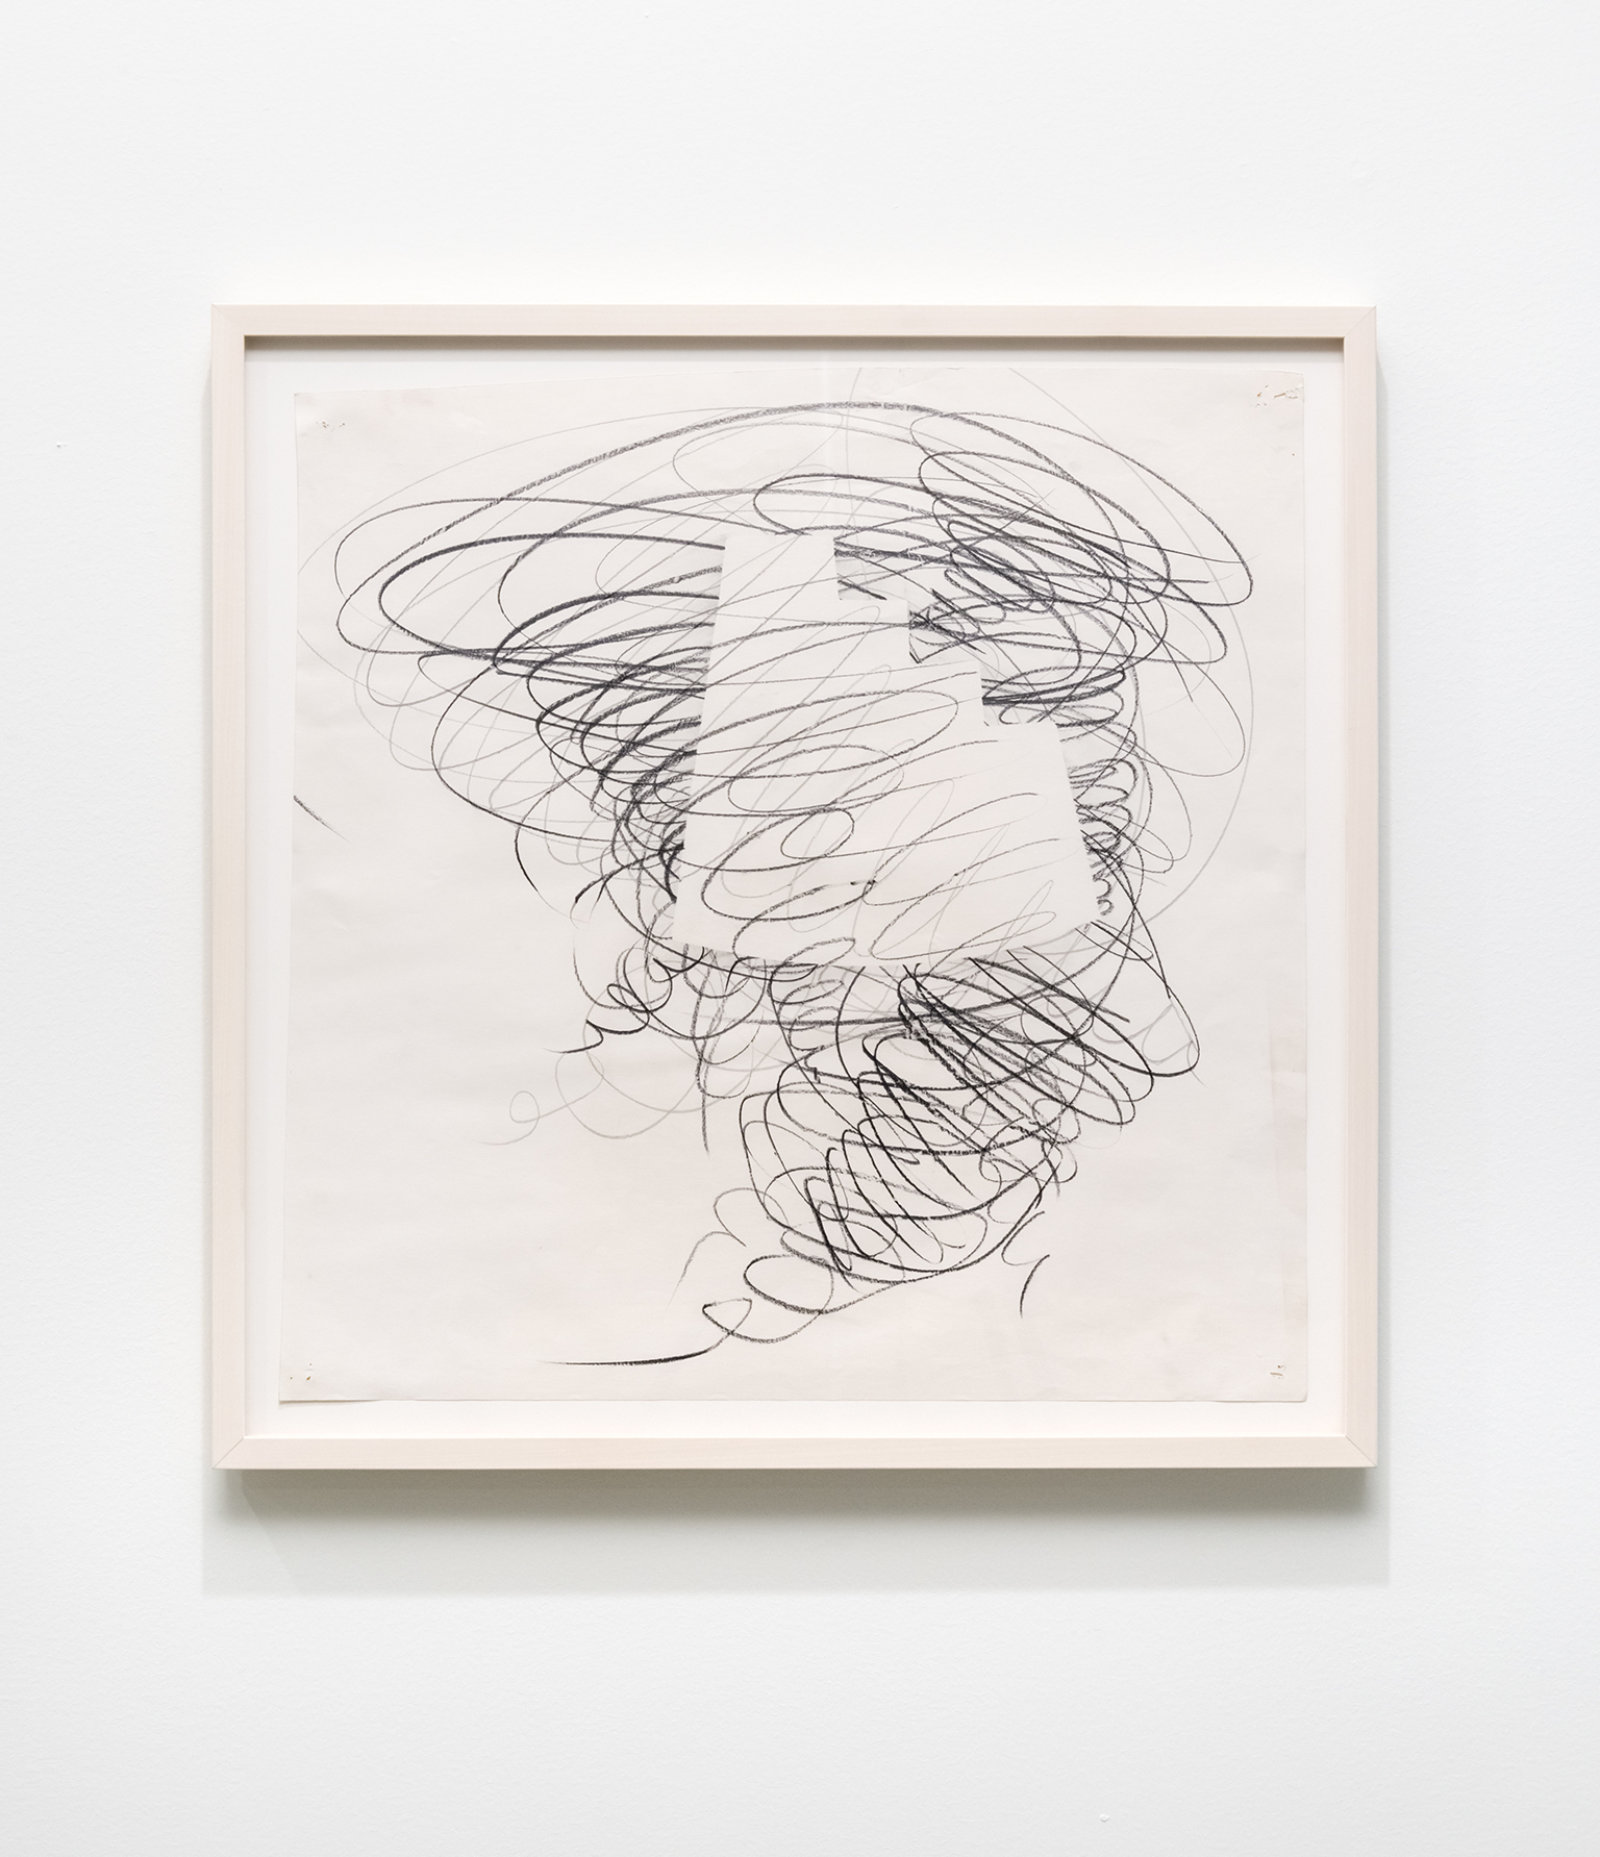 Jerry Pethick, Kuhn Shape III Vortex Studies Cable St., 1990, graphite, butter on paper, dimensions variable